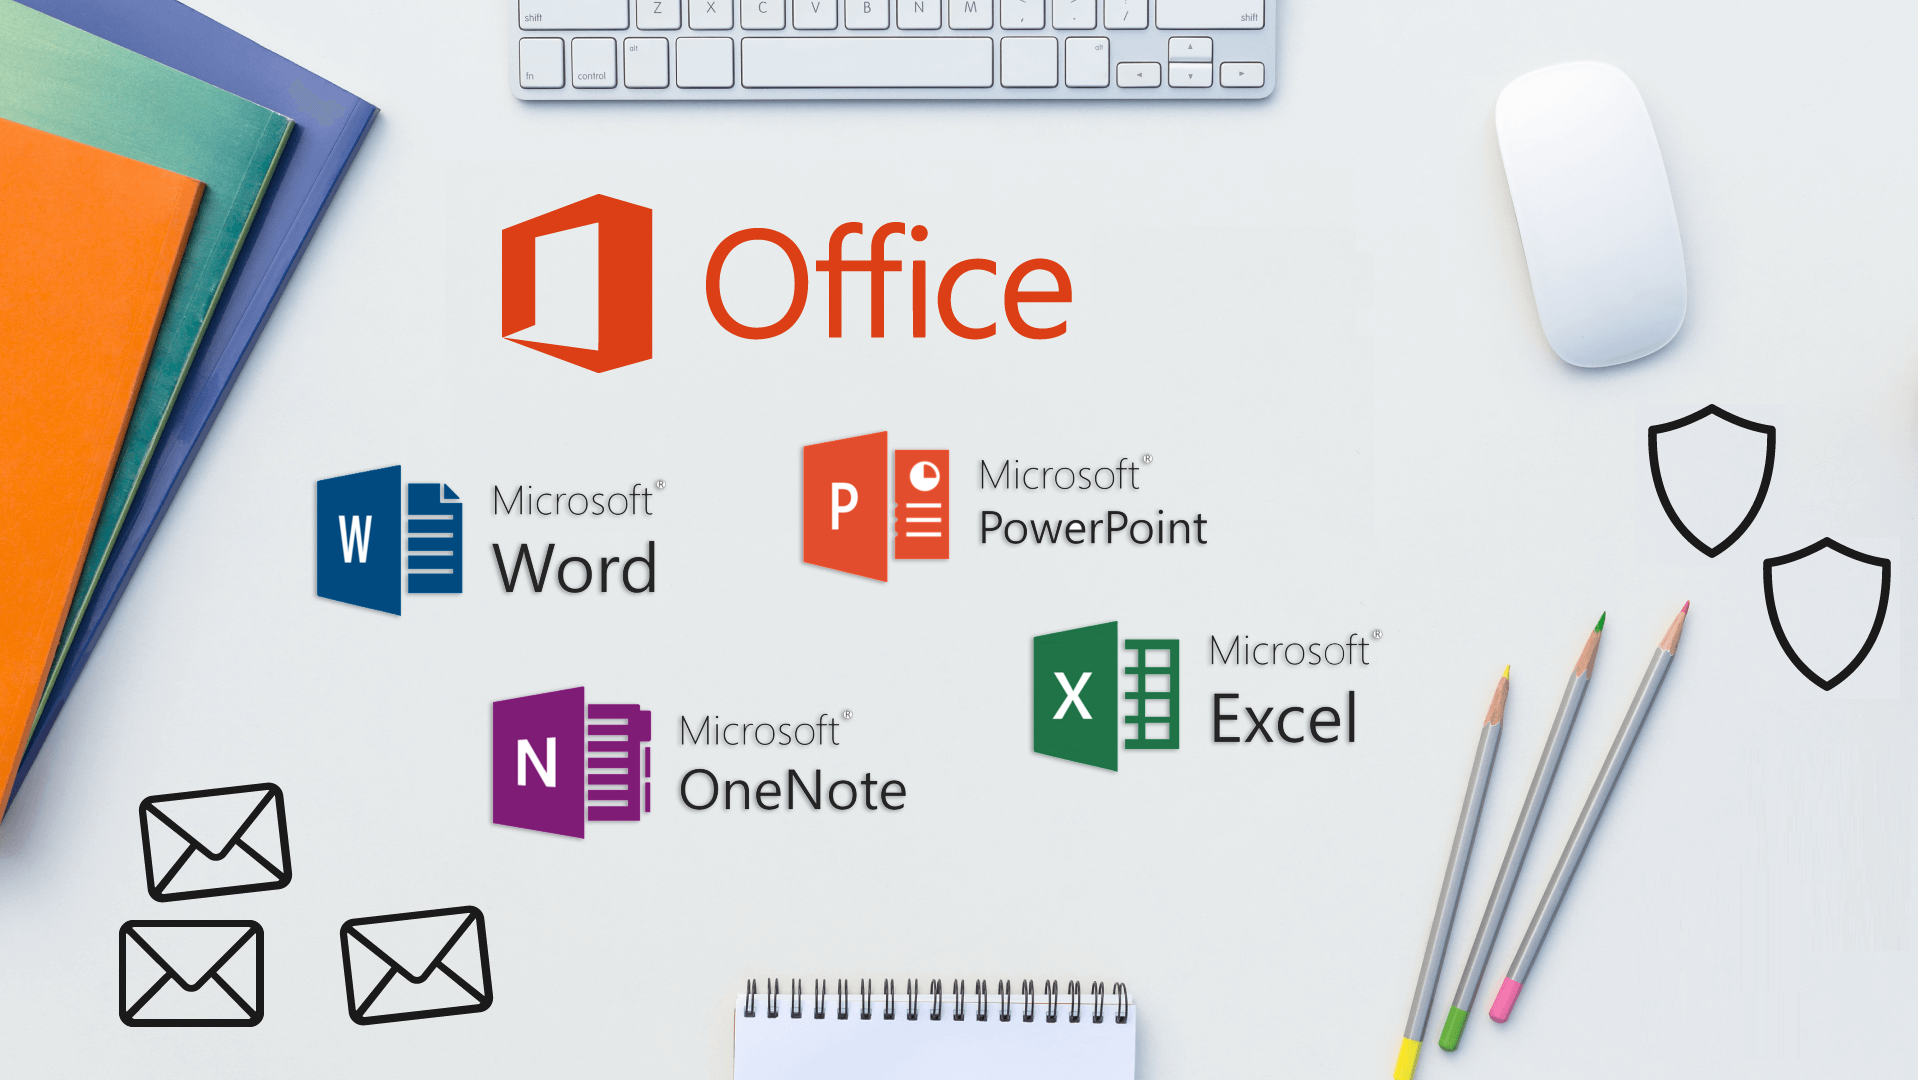 Sign up to training Microsoft office courses - Develop e-Learning Solutions